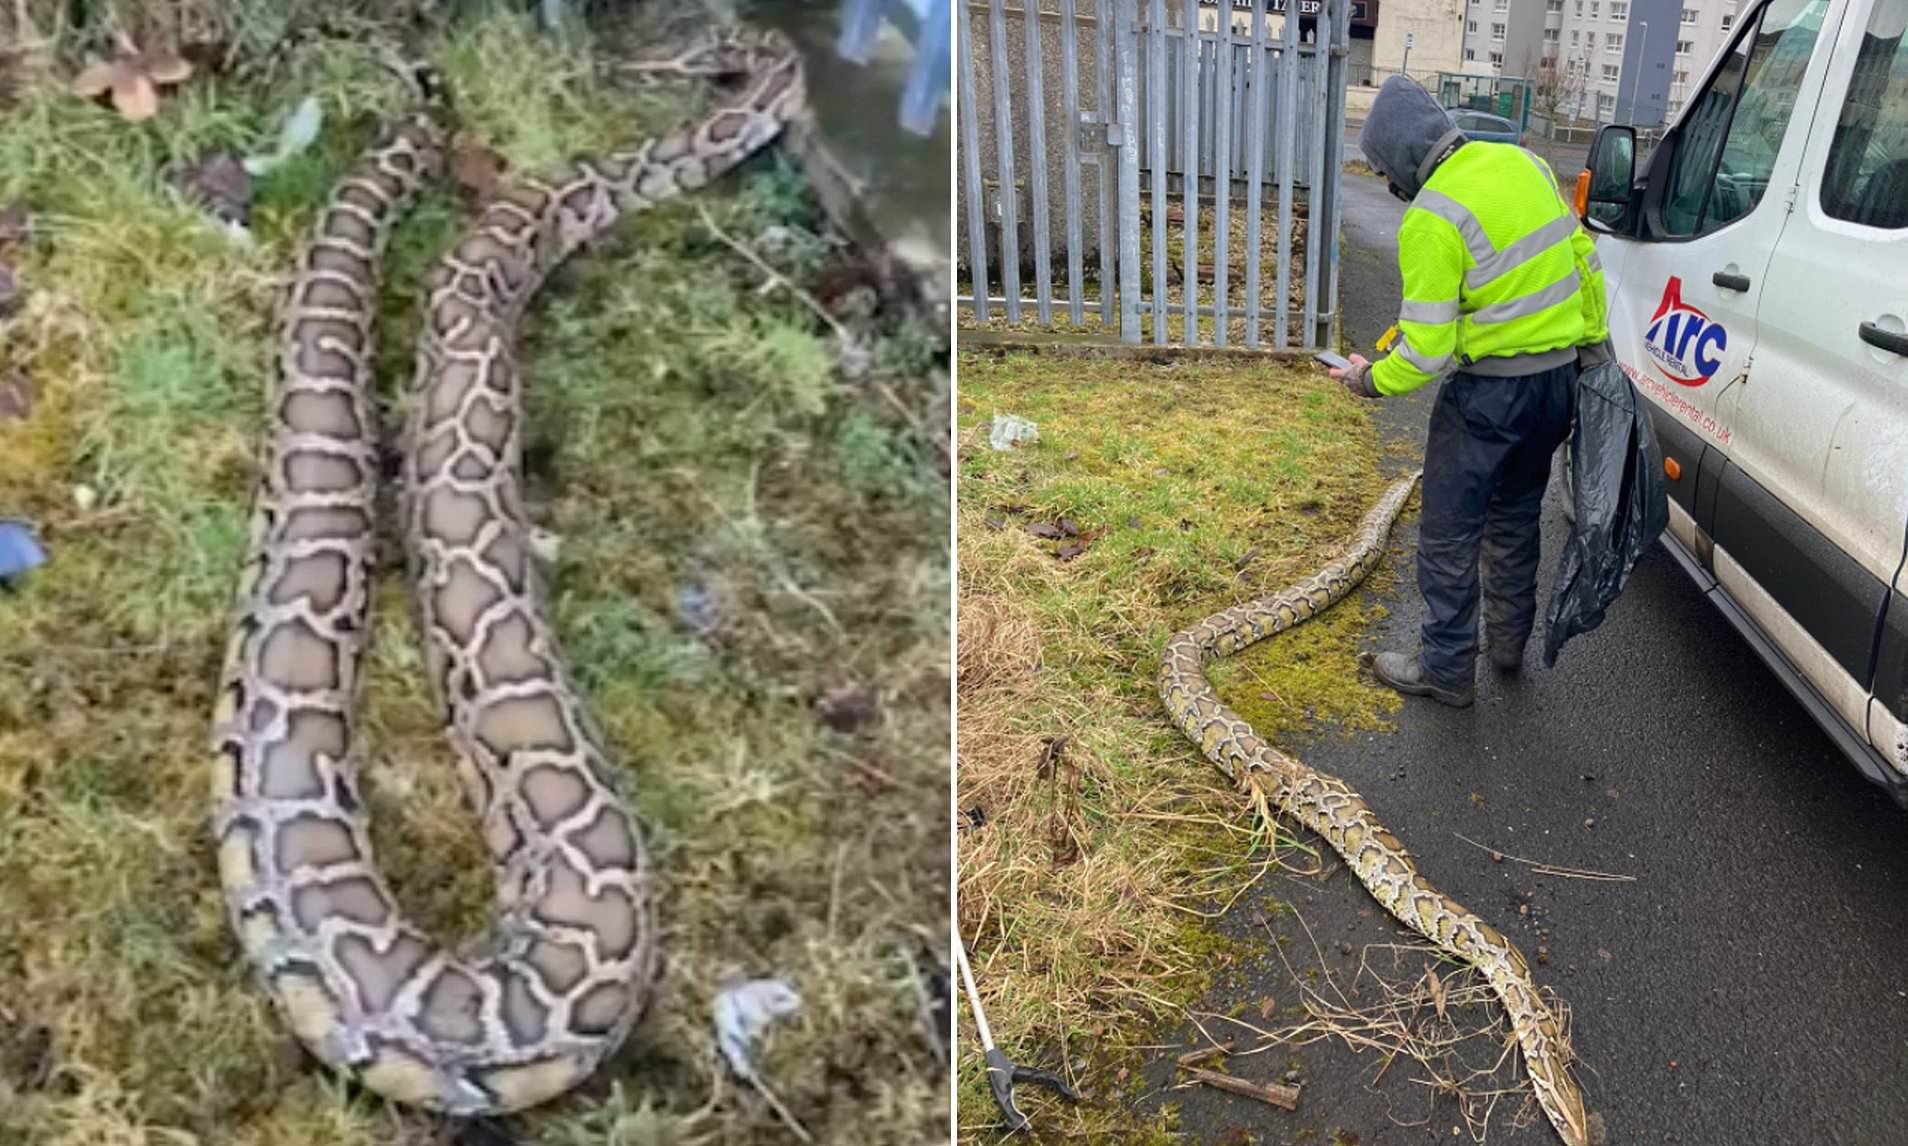 14ft-python-found-curled-up-outside-Scottish-pub-rapidnews-rapid-news